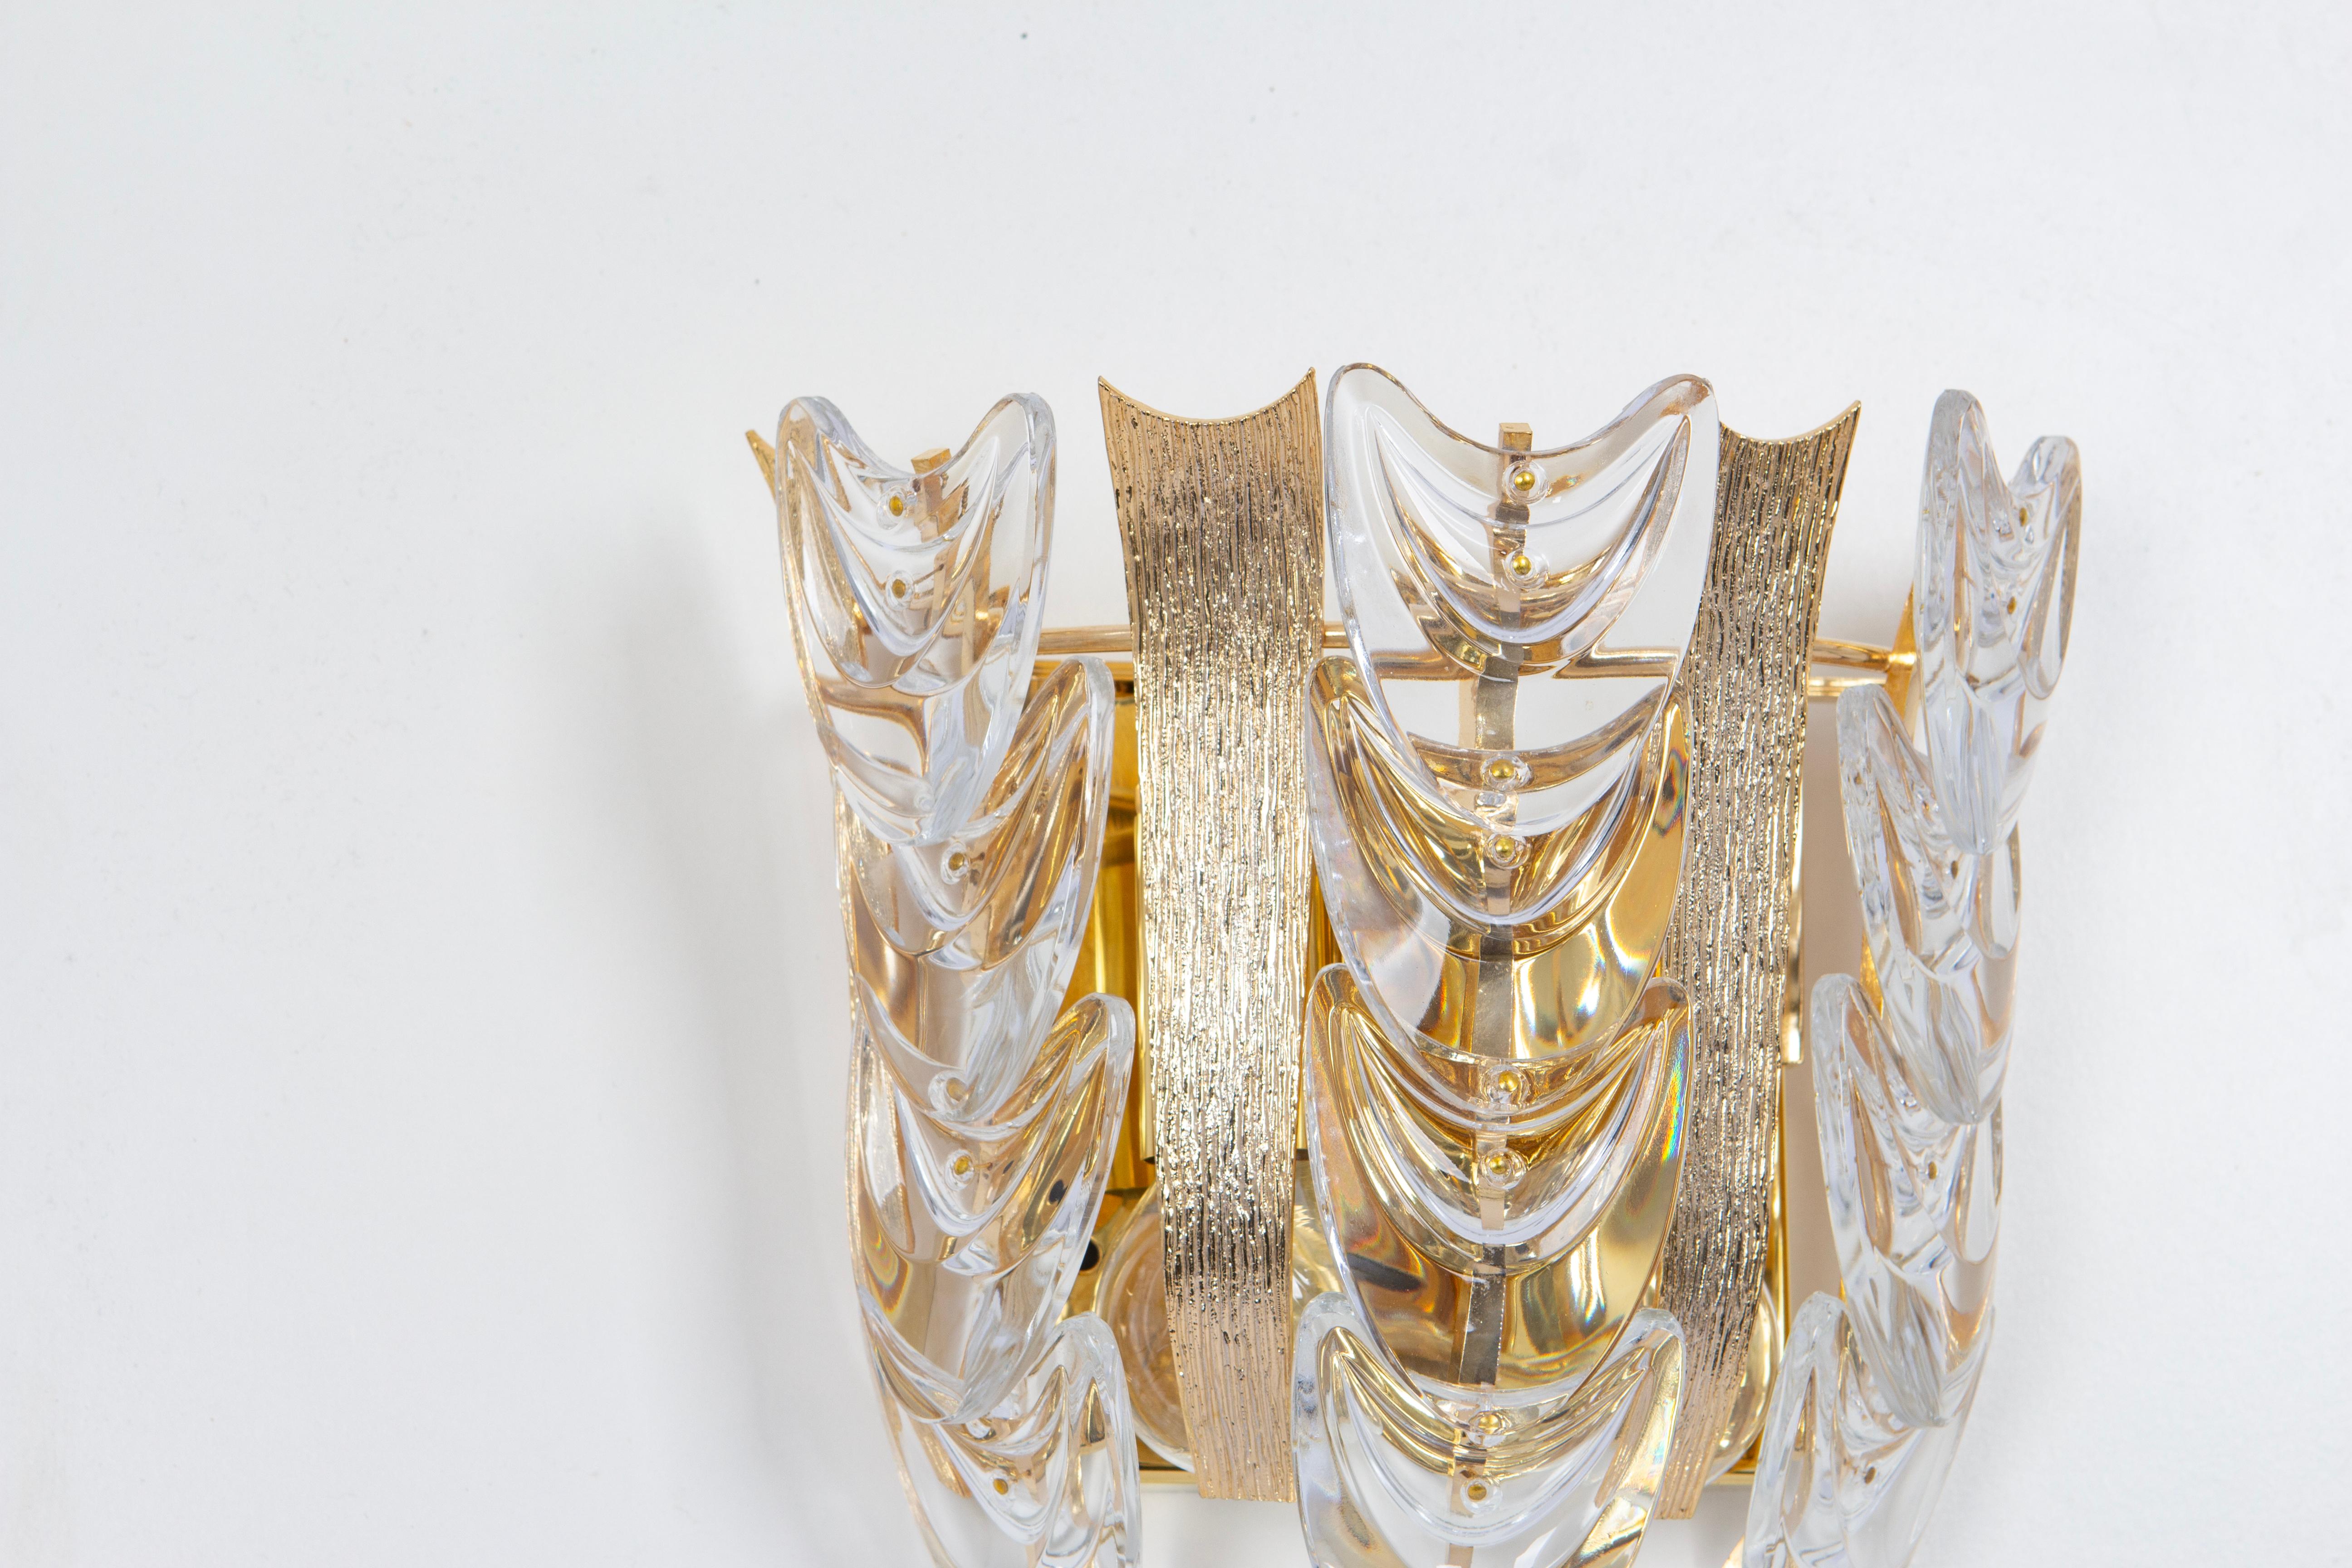 Single stunning golden sconce, made by Palwa, design Sciolari Style- Germany, circa 1960-1969.
Crystal glasses on a gilt brass frame.
Best of the 1960s from Germany.

High quality and in very good condition. Cleaned, well-wired and ready to use.